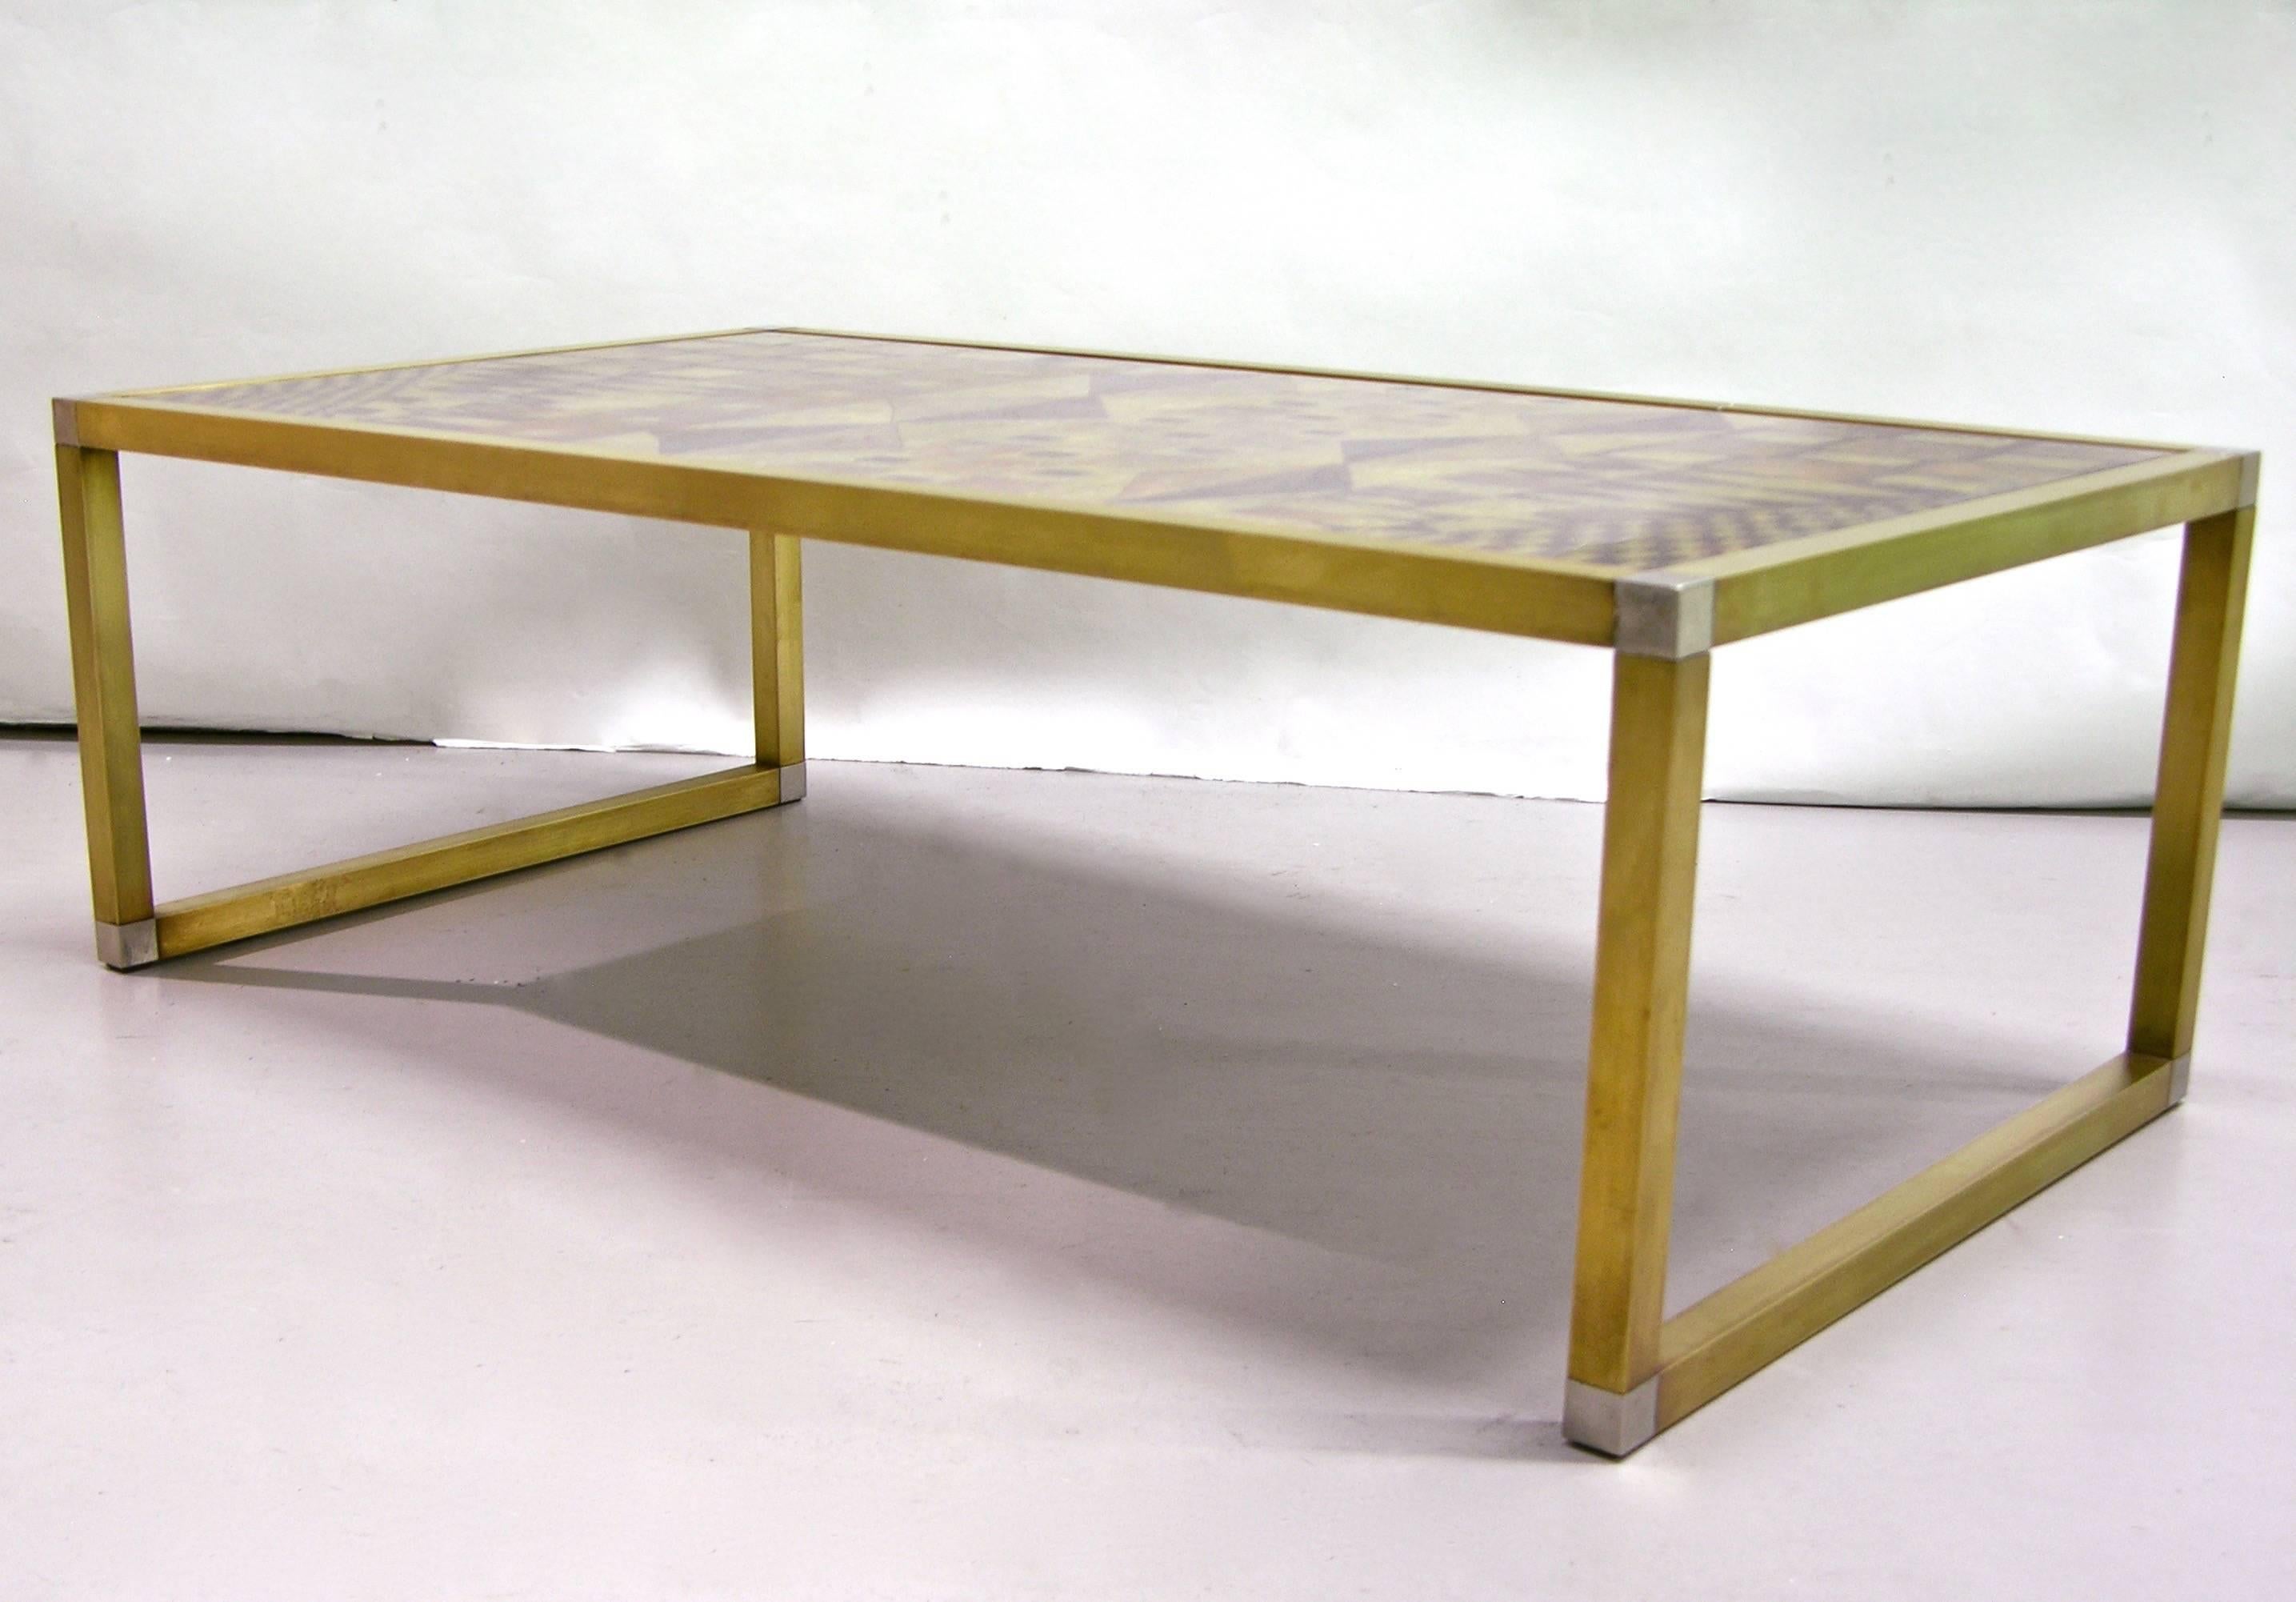 Brushed 1970s Italian Art Deco Abstract Design Brass Coffee/Sofa Table with Gold Leaf